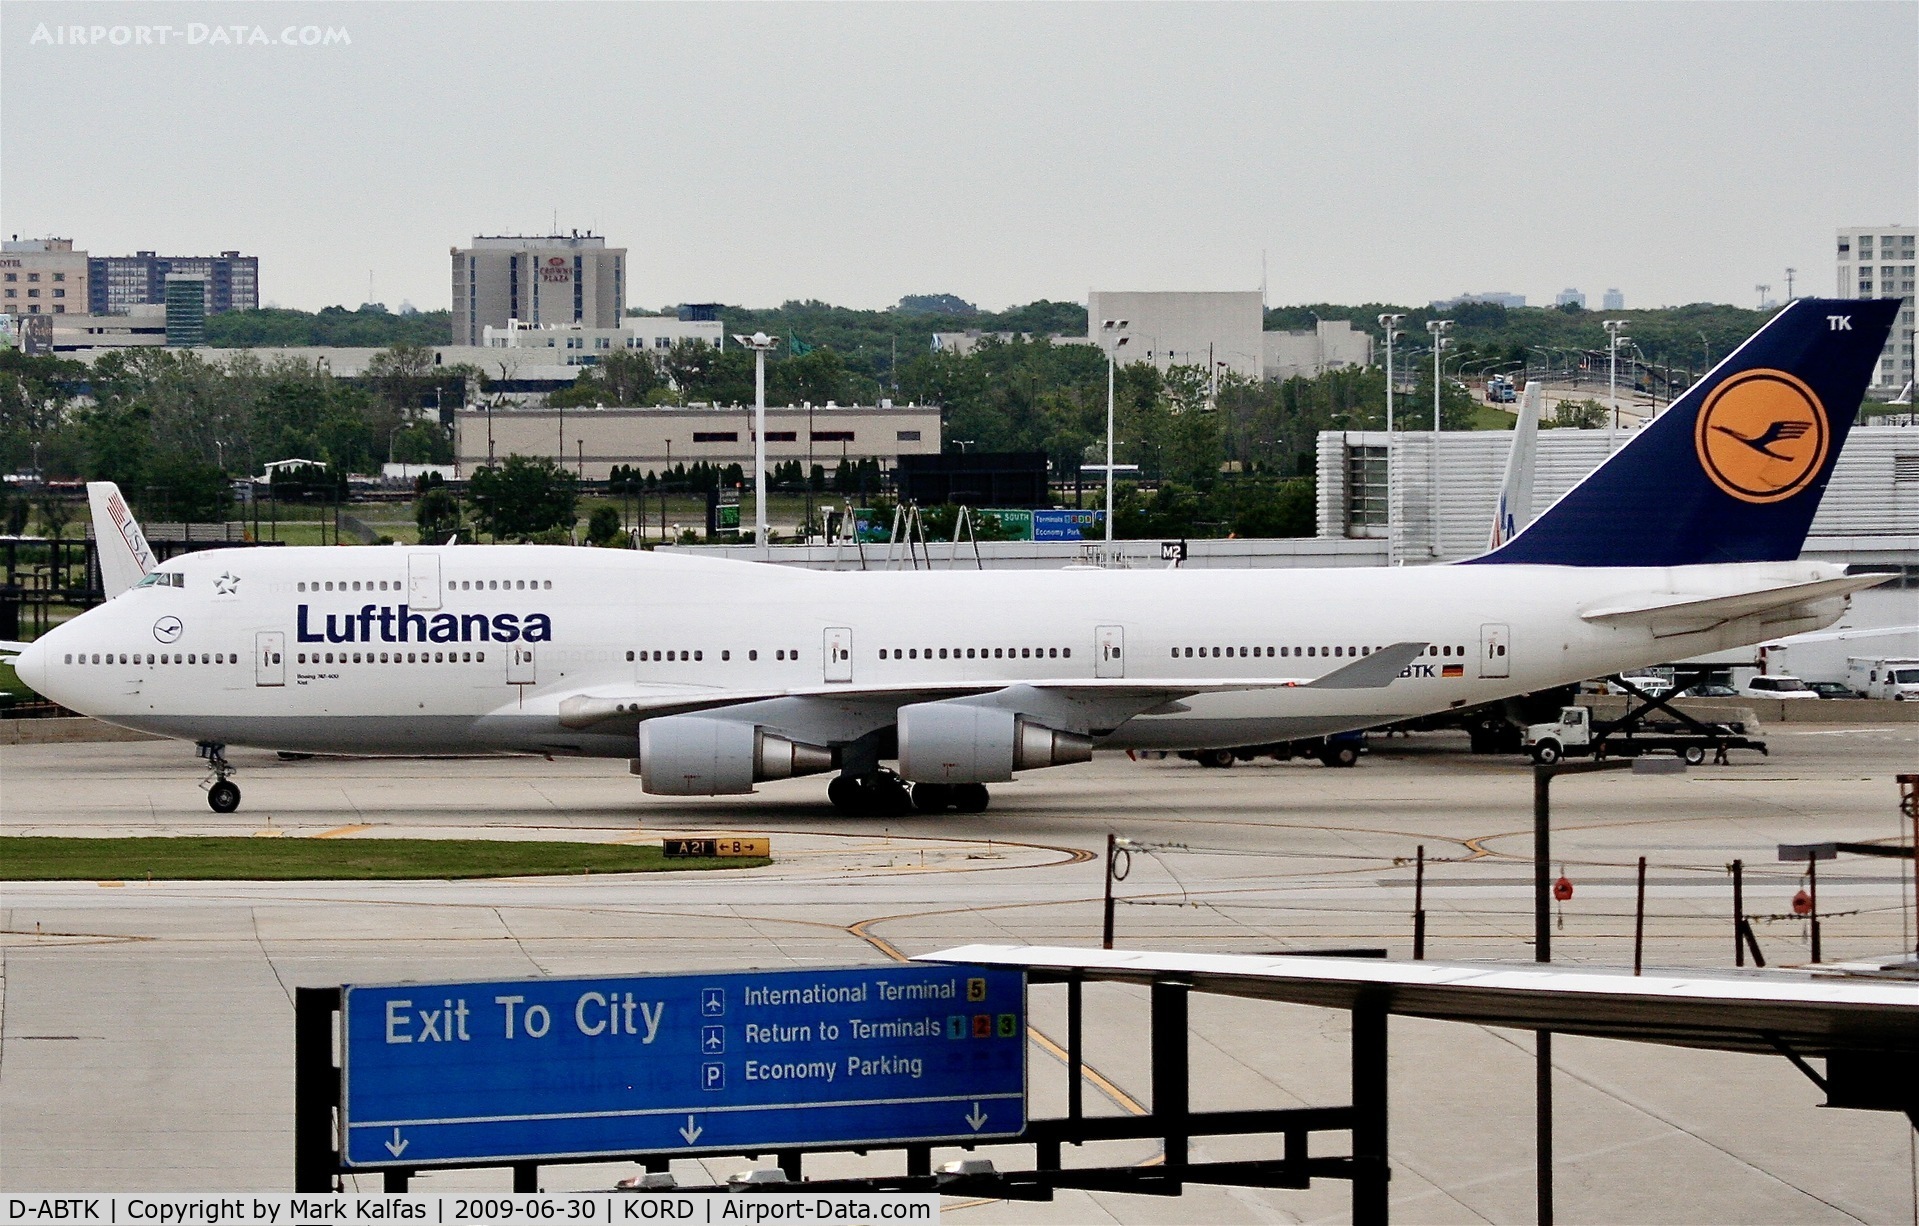 D-ABTK, 2001 Boeing 747-430 C/N 29871, Lufthansa Boeing 747-430, D-ABTK taxing toi the gat at ORD